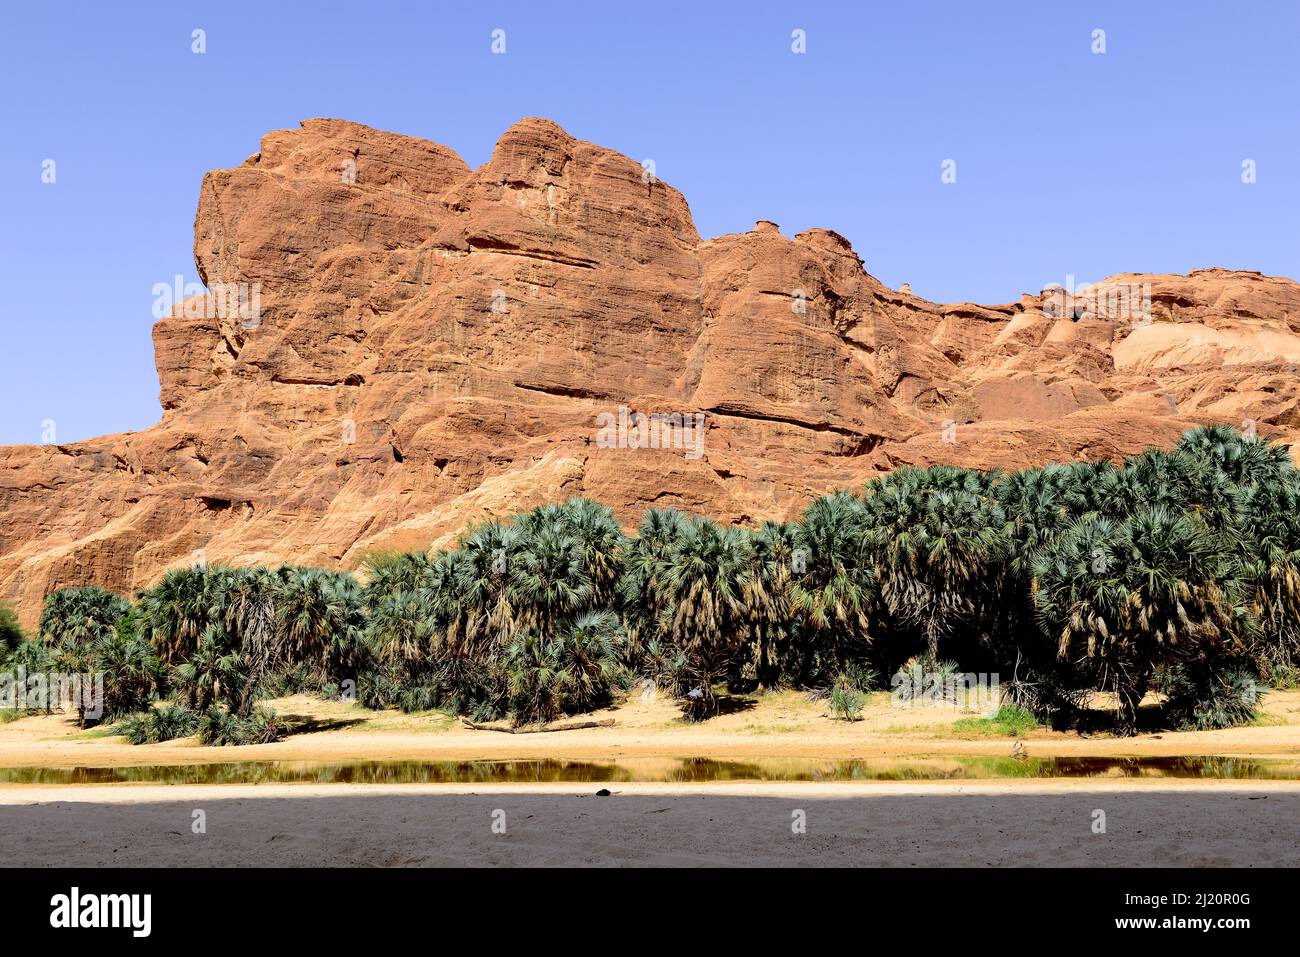 Eroded sandstone rock formations and trees in the Ennedi Natural And Cultural Reserve, UNESCO World Heritage Site, Sahara Desert,Chad. September 2019. Stock Photo